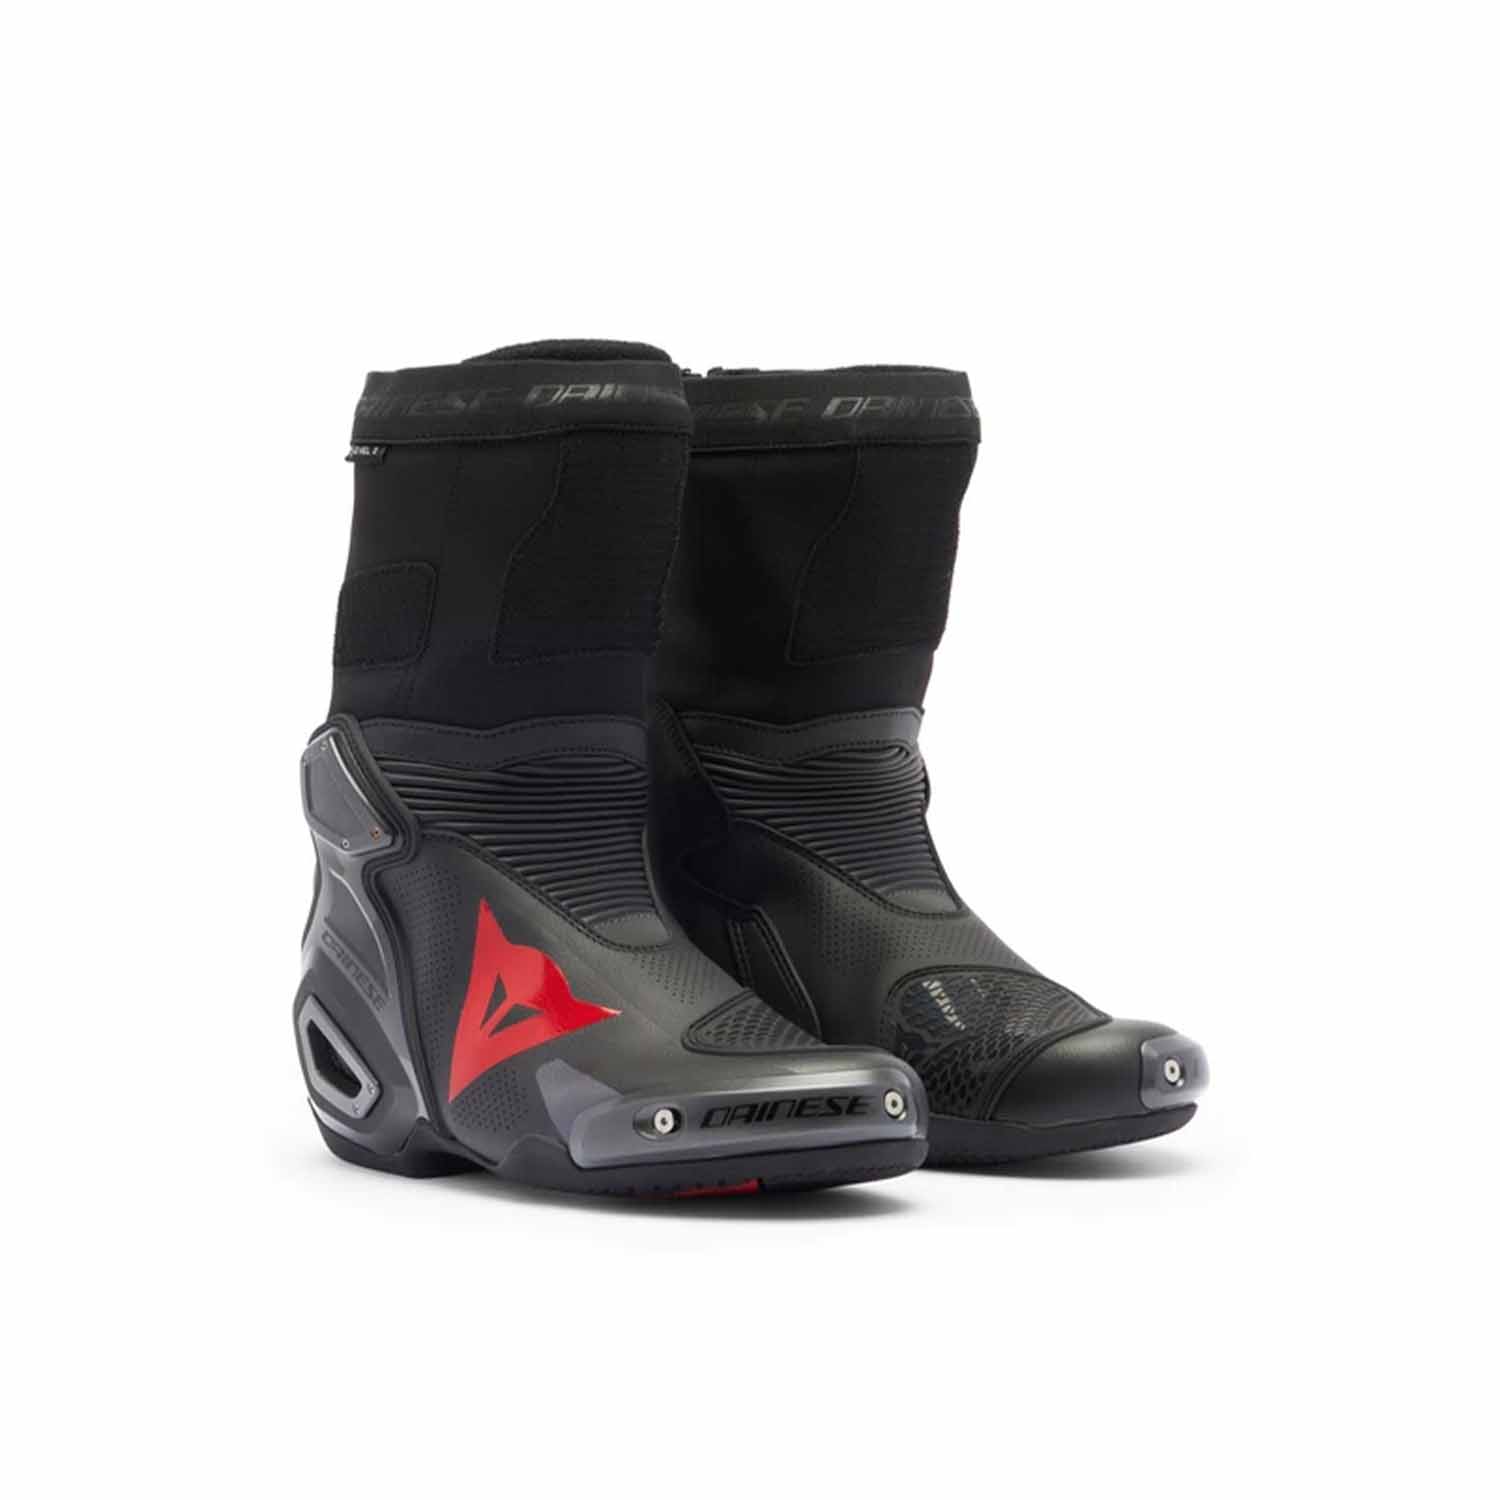 Image of Dainese Axial 2 Air Boots Black Red Fluo Size 41 EN